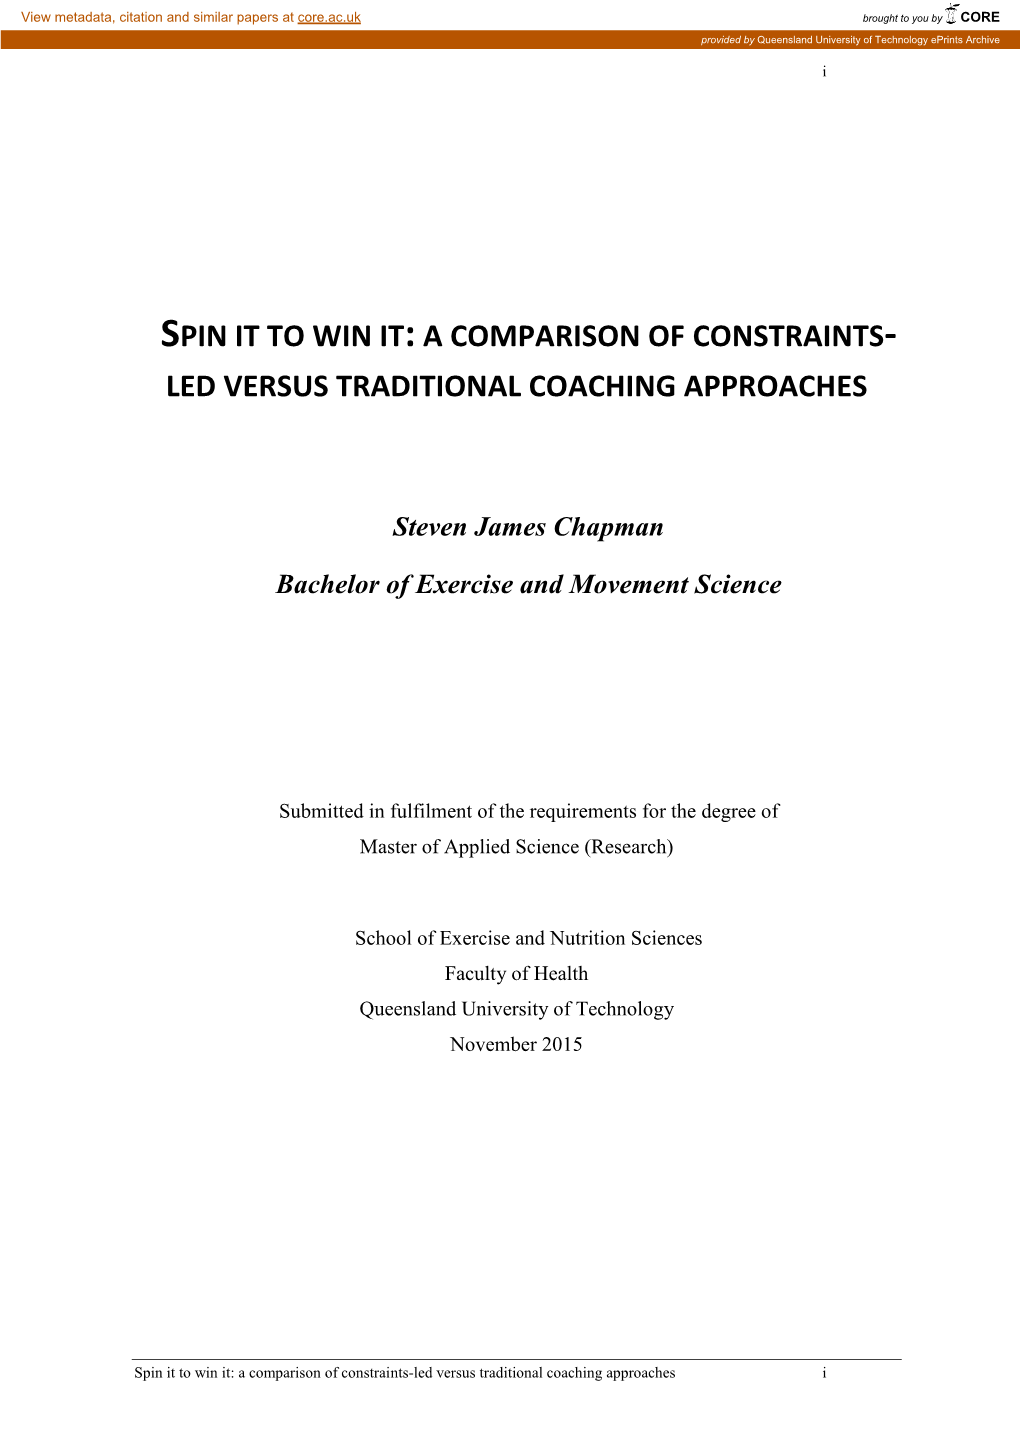 Spin It to Win It:A Comparison of Constraints